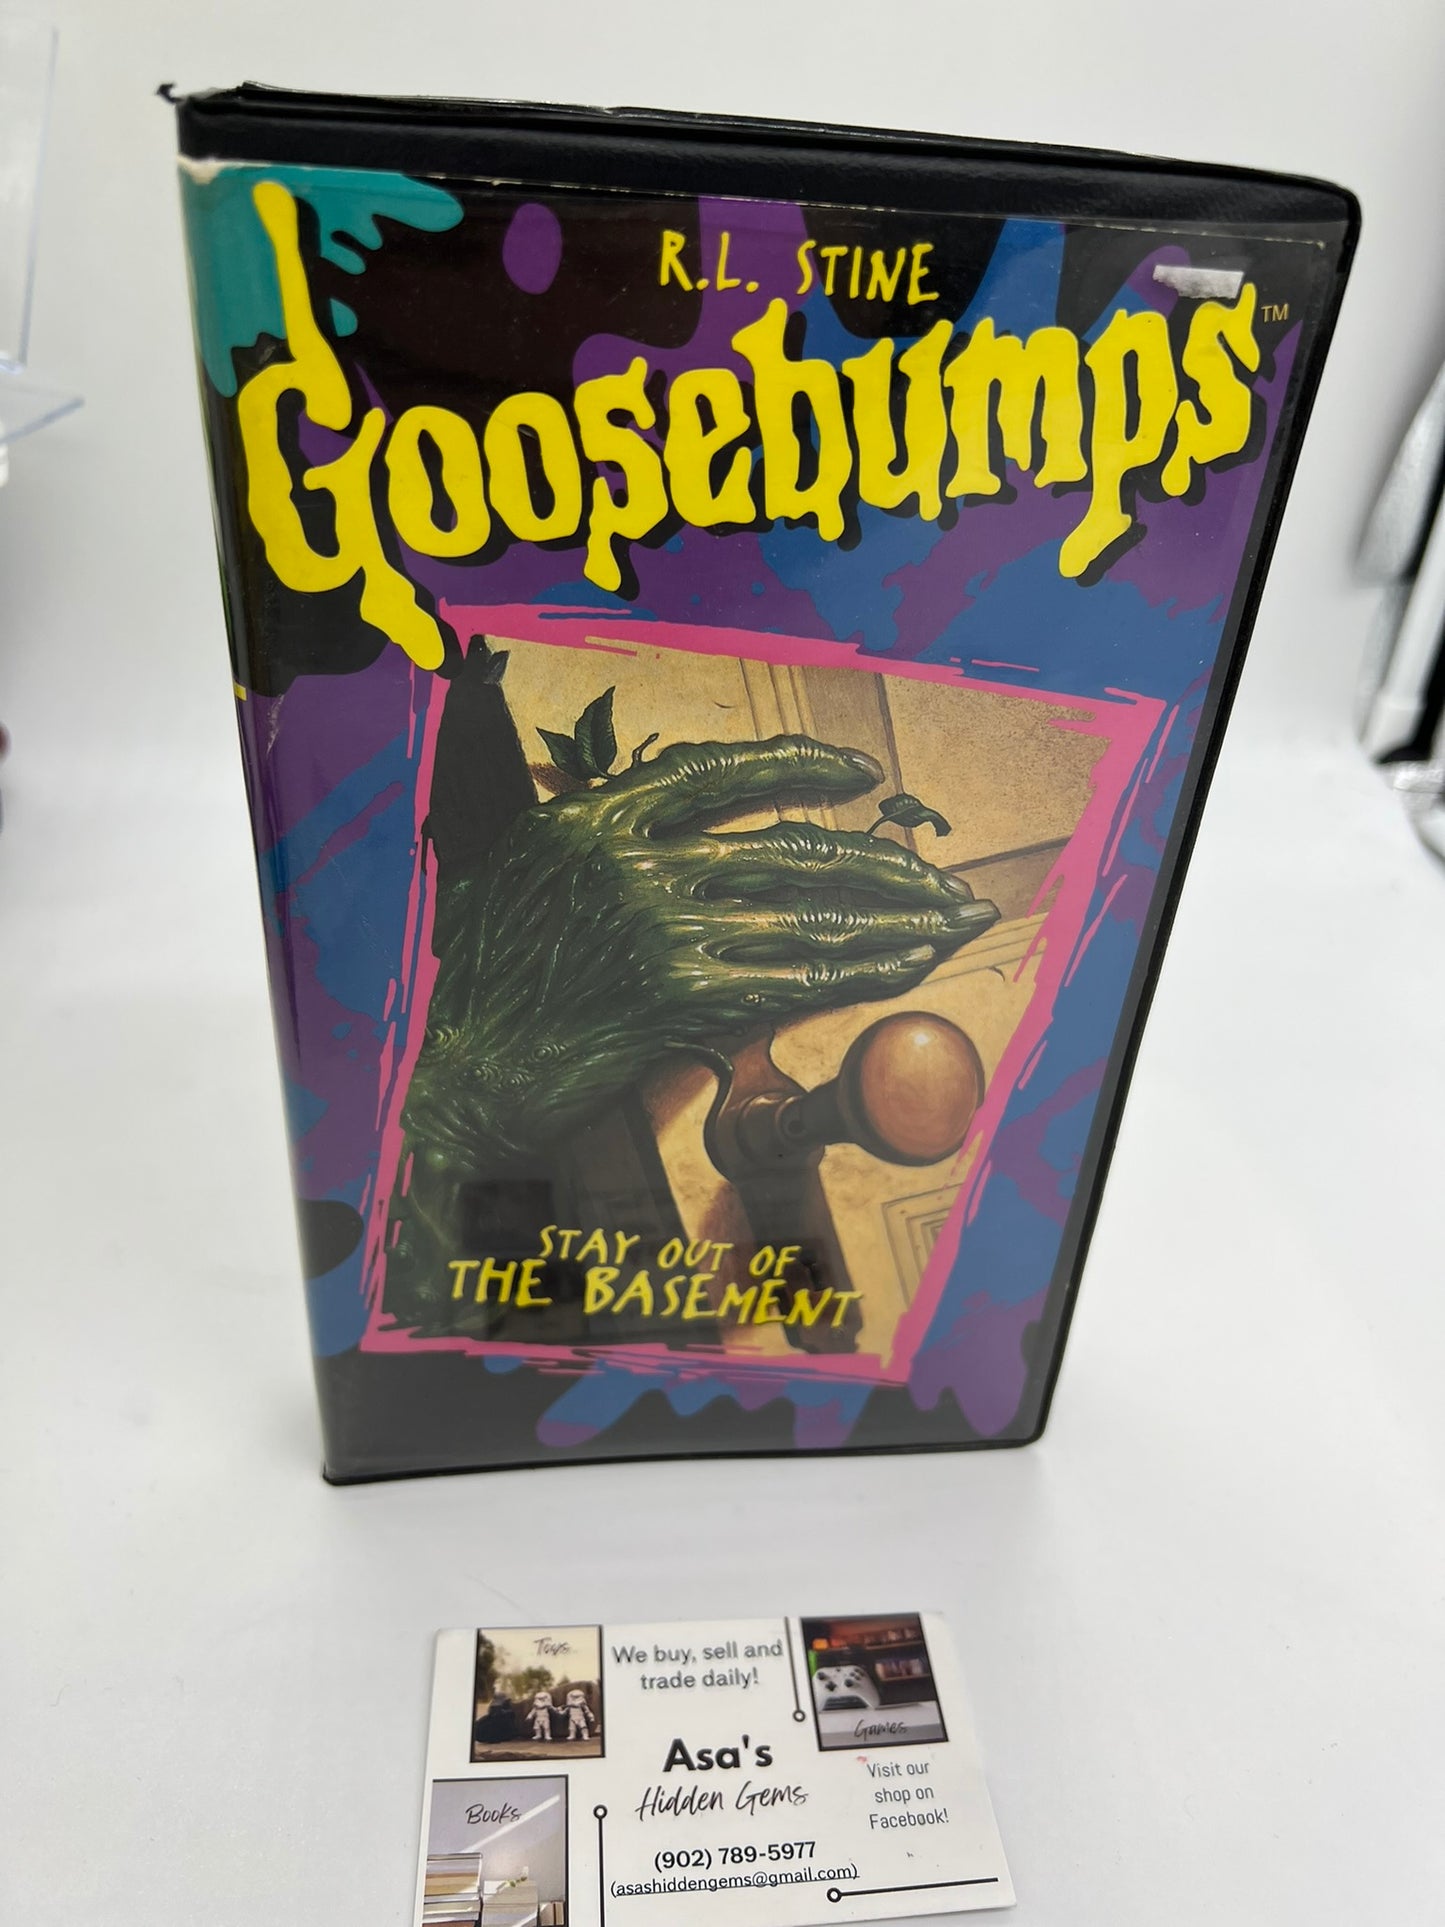 VHS - Goosebumps - Stay Out Of The Basement - RL Stine - 1996 - Clamshell